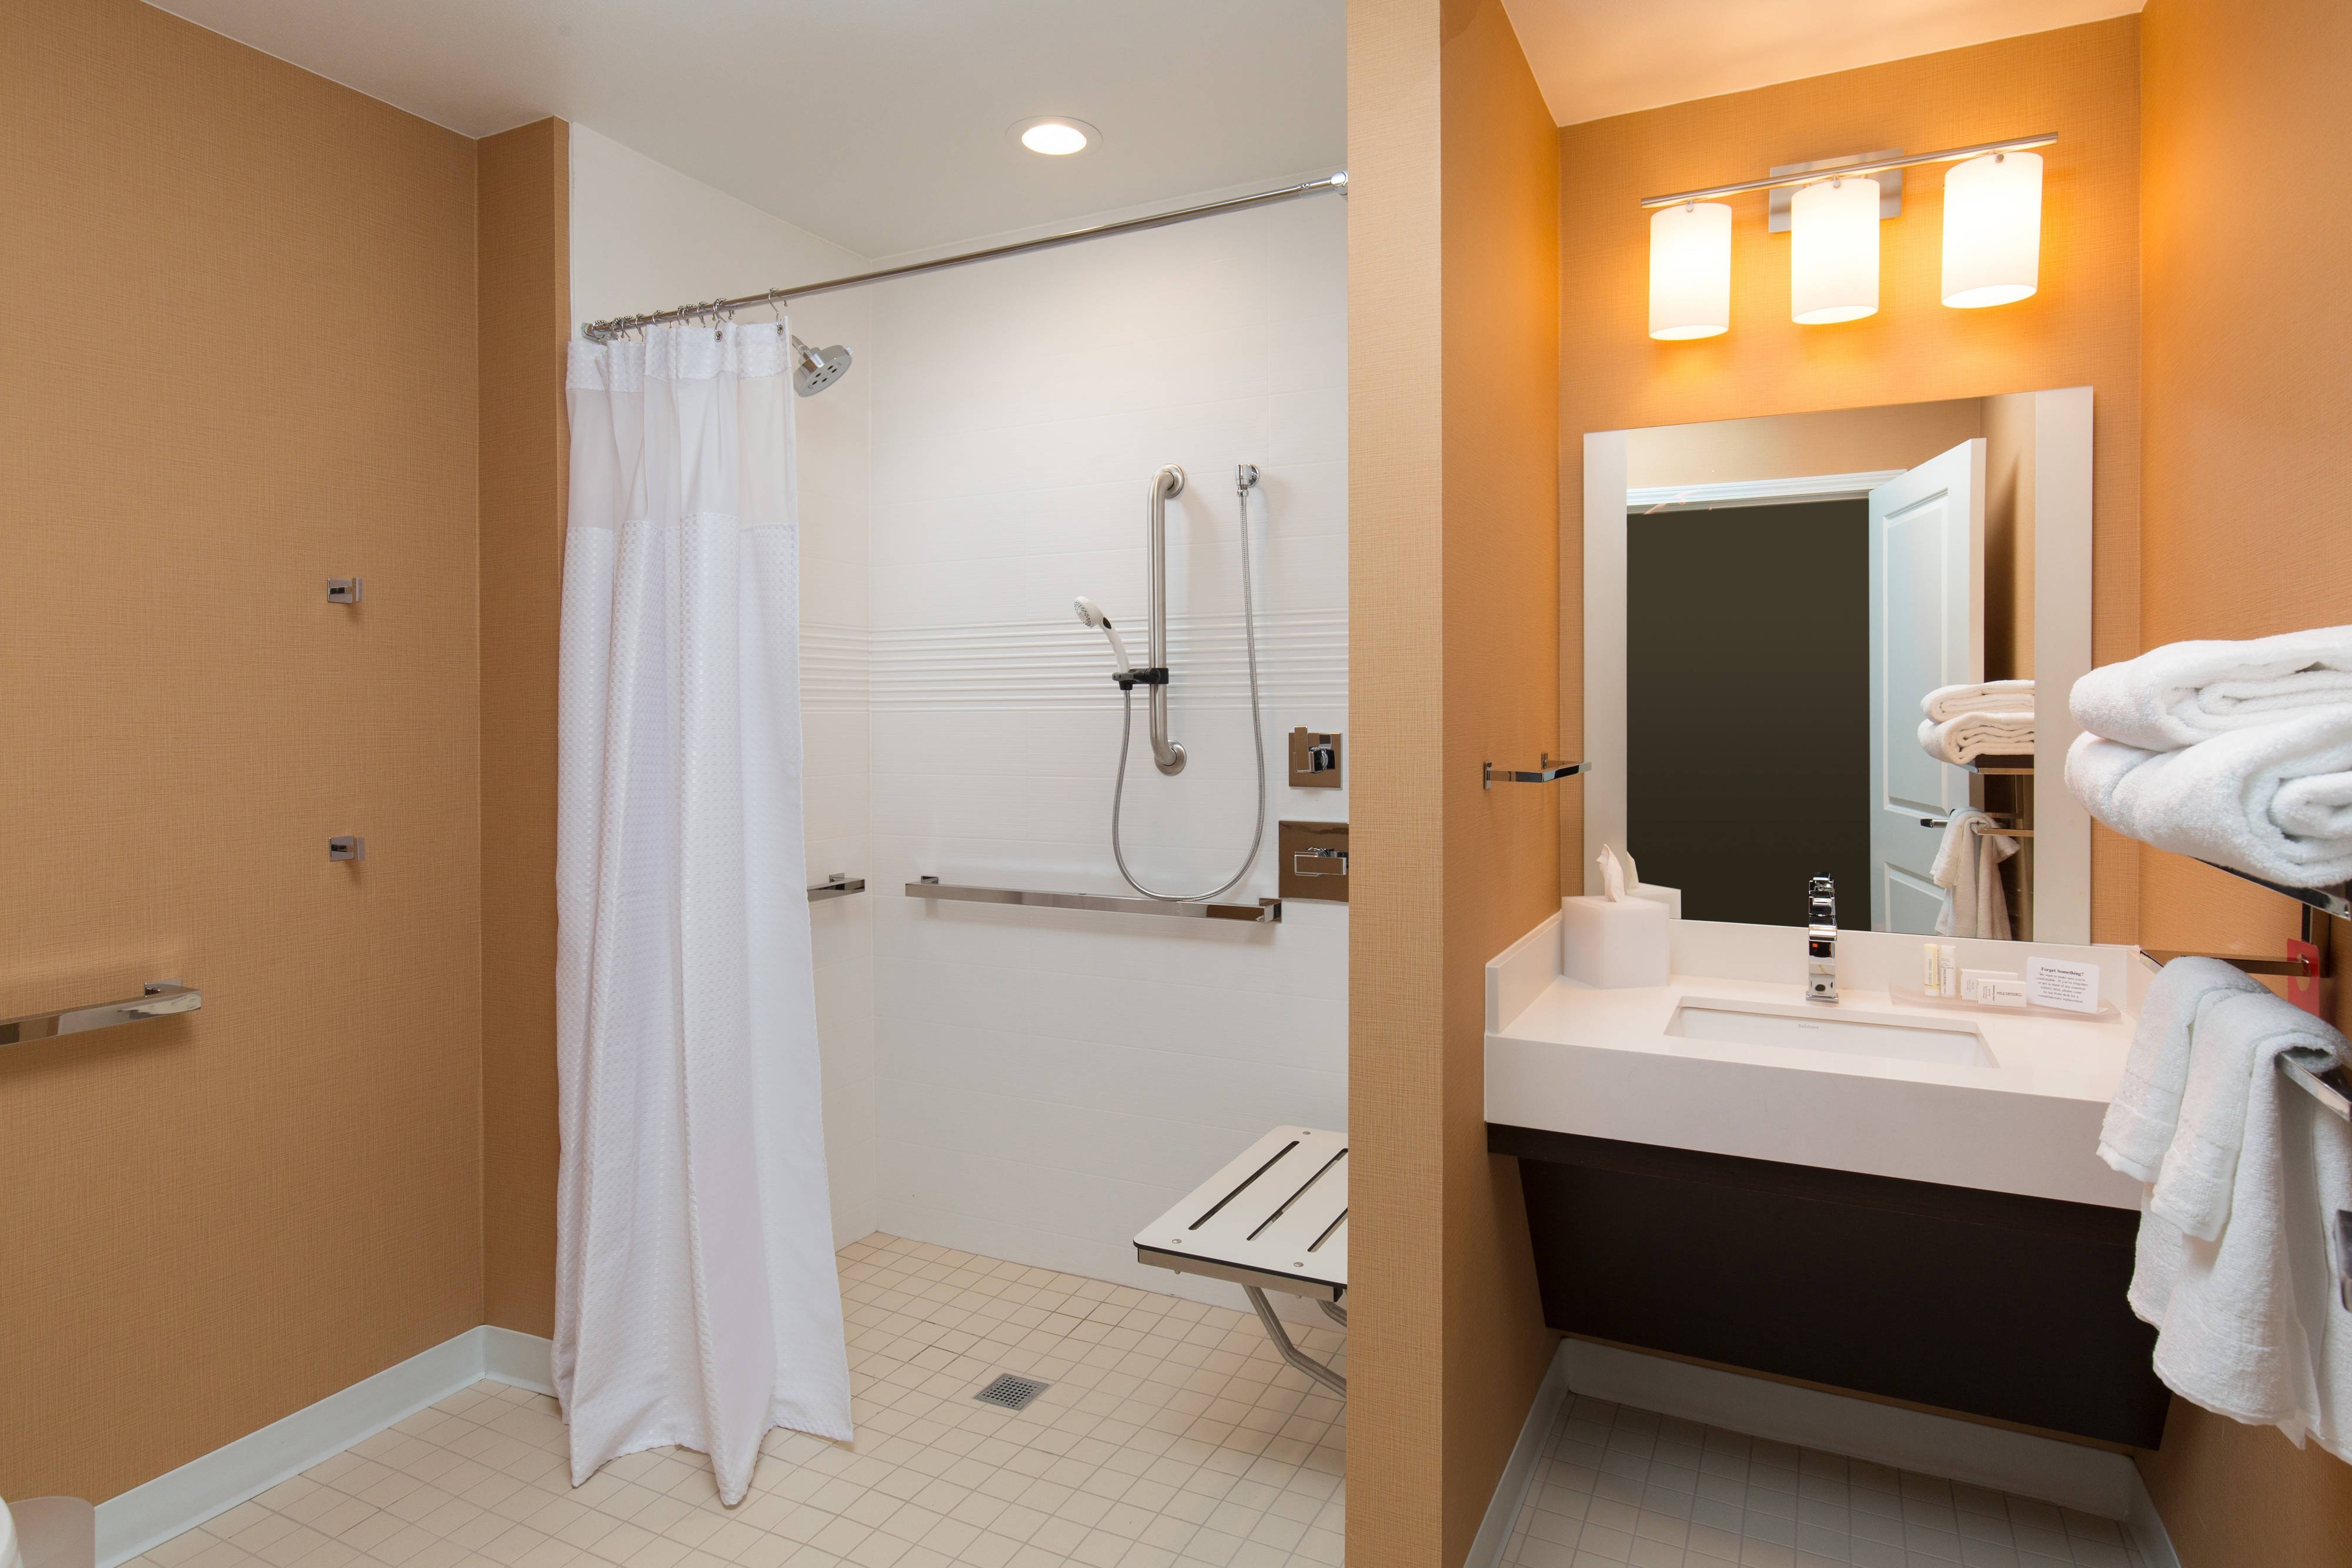 Accessible Bathroom - Roll-In-Shower